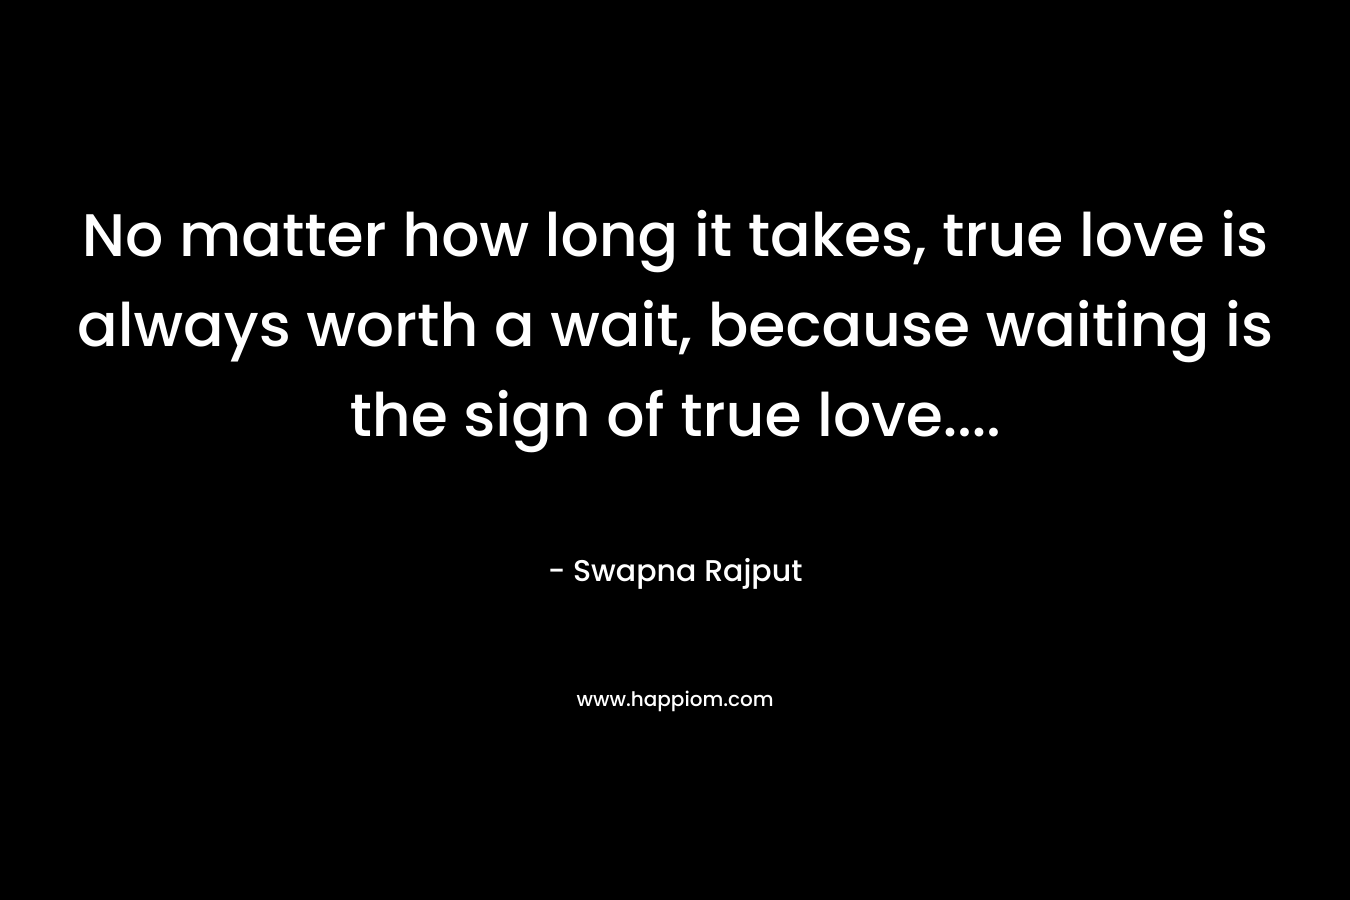 No matter how long it takes, true love is always worth a wait, because waiting is the sign of true love....